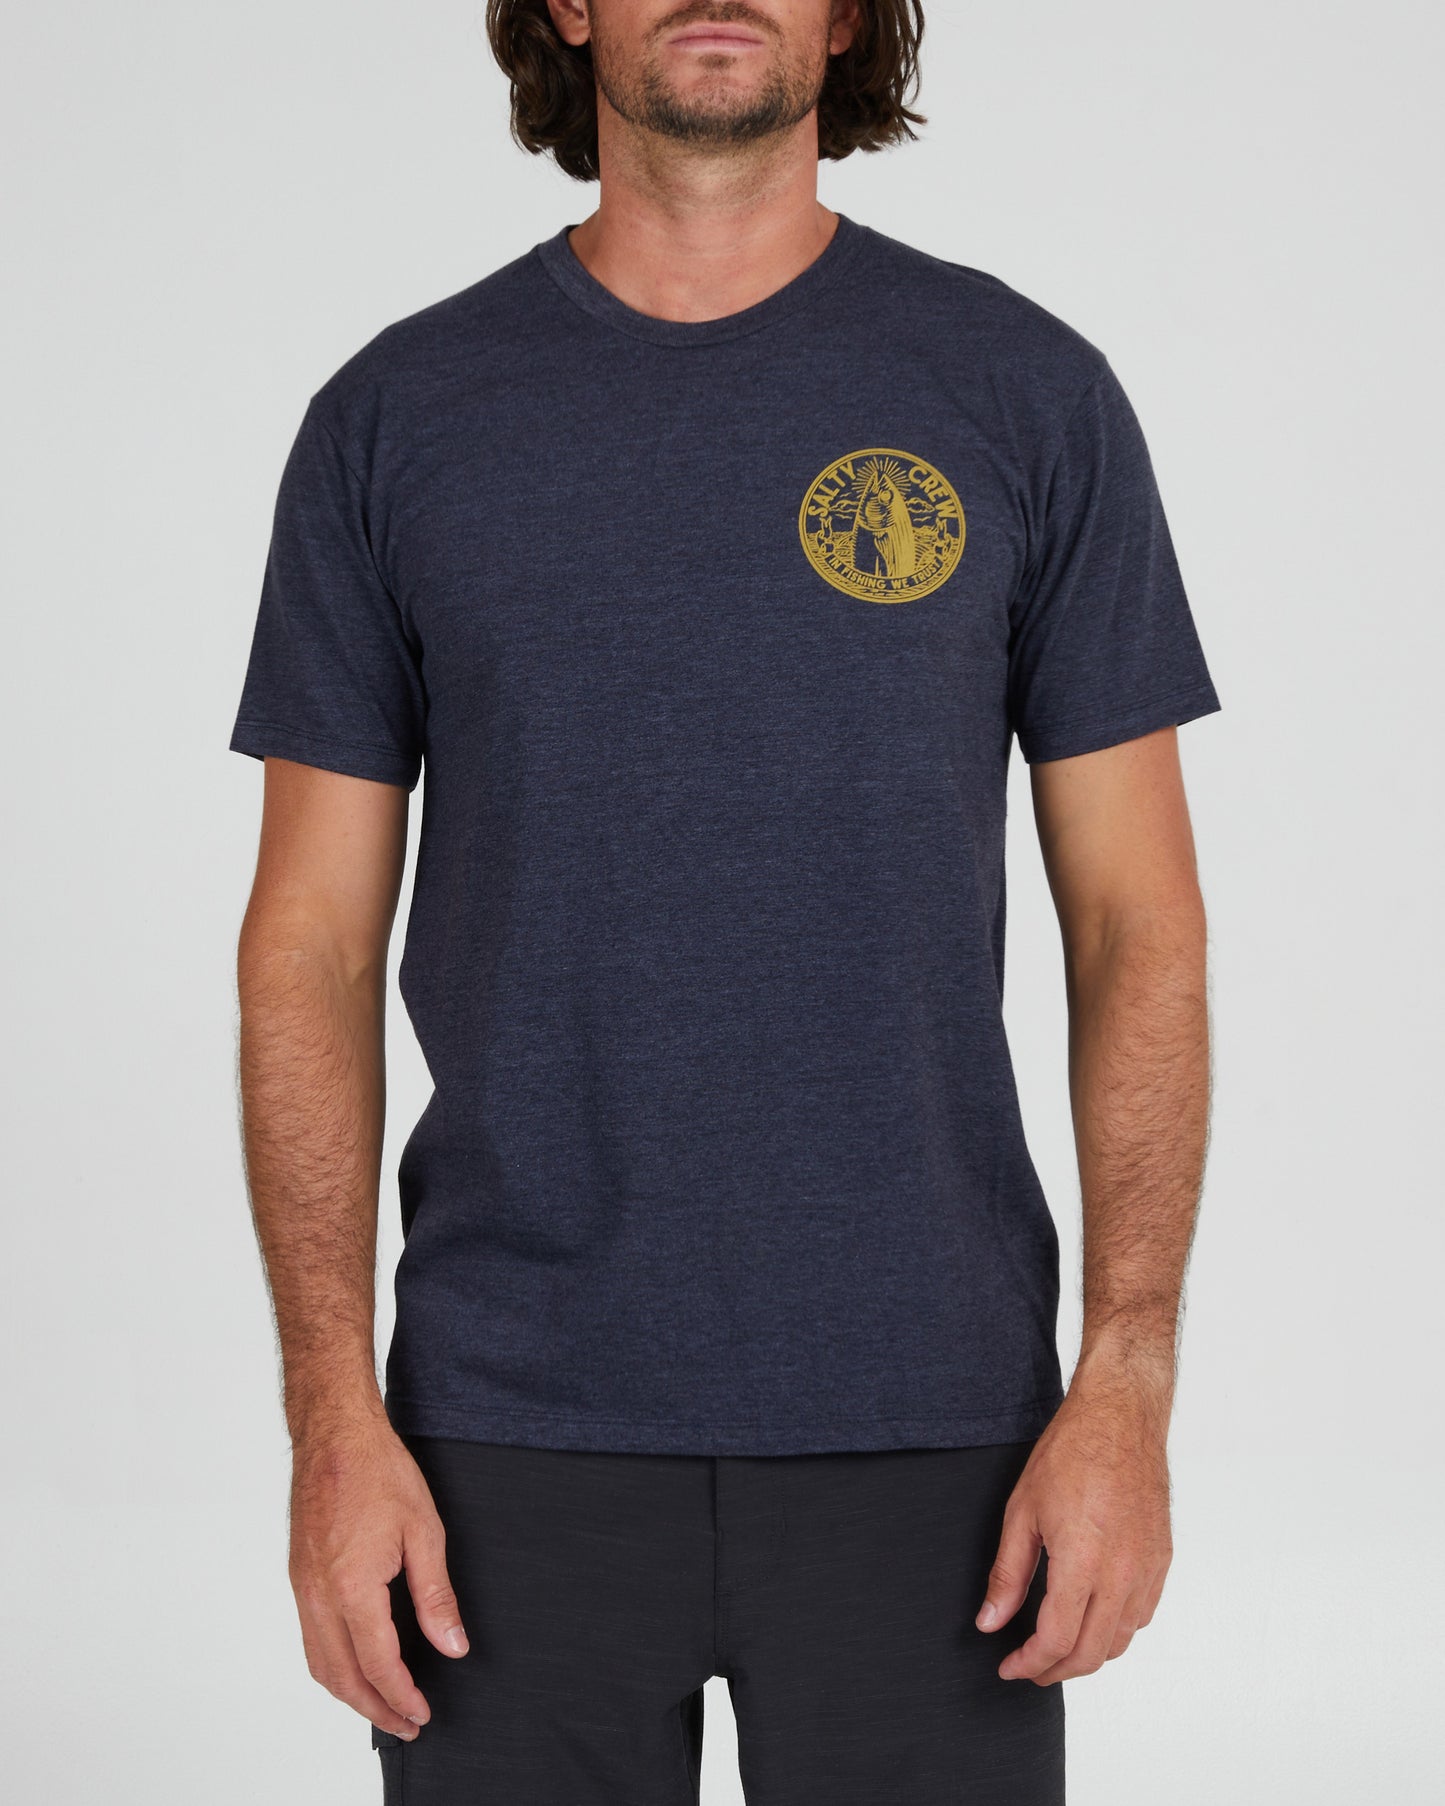 On body front of the In Fishing We Trust Navy Heather S/S Premium Tee